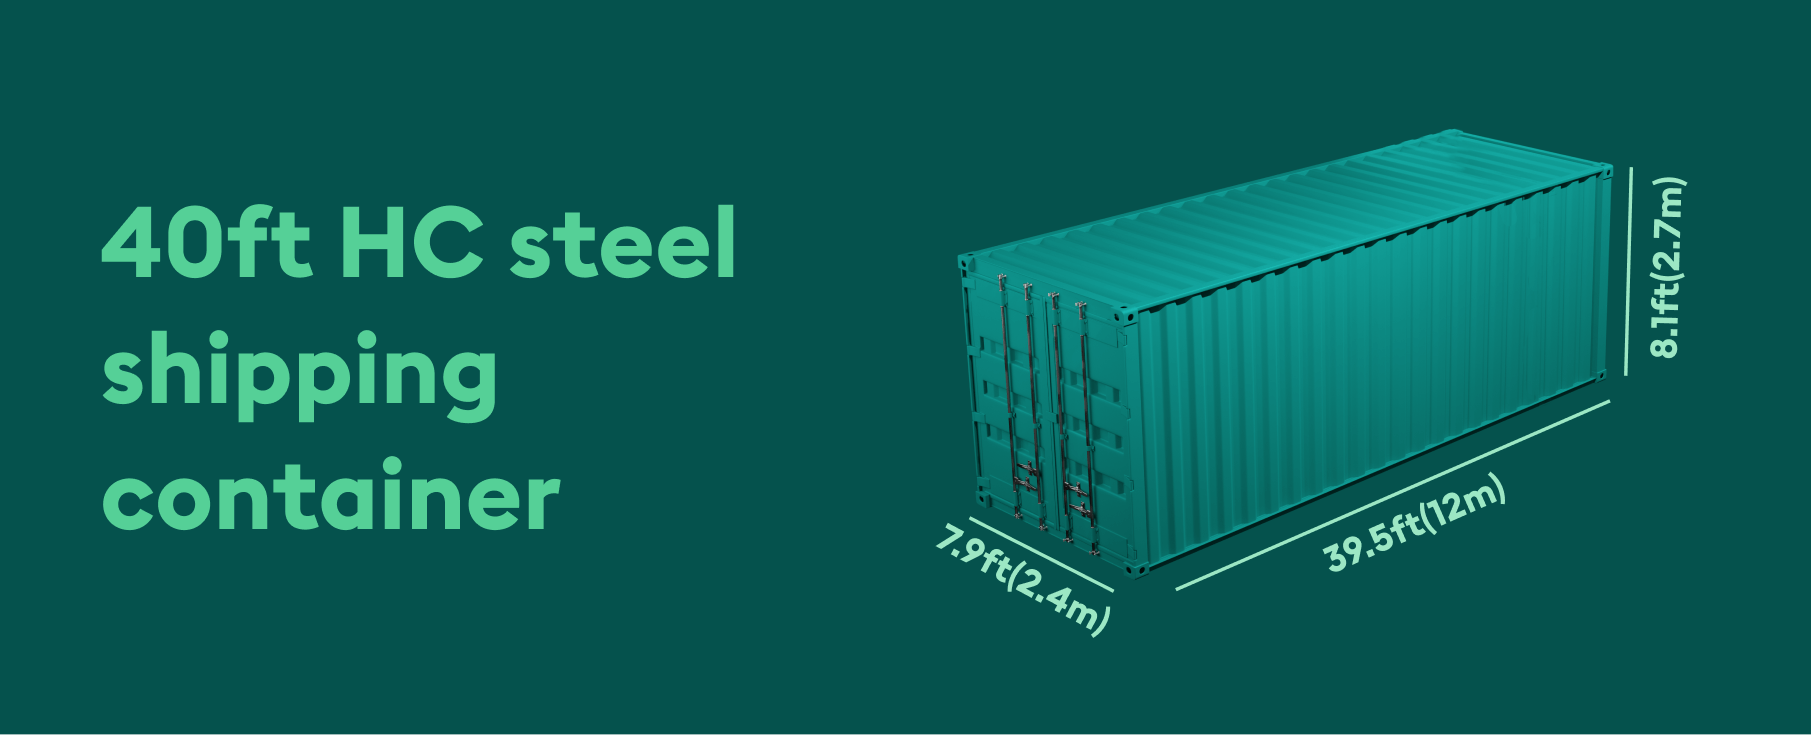 40ft HC steel shipping container